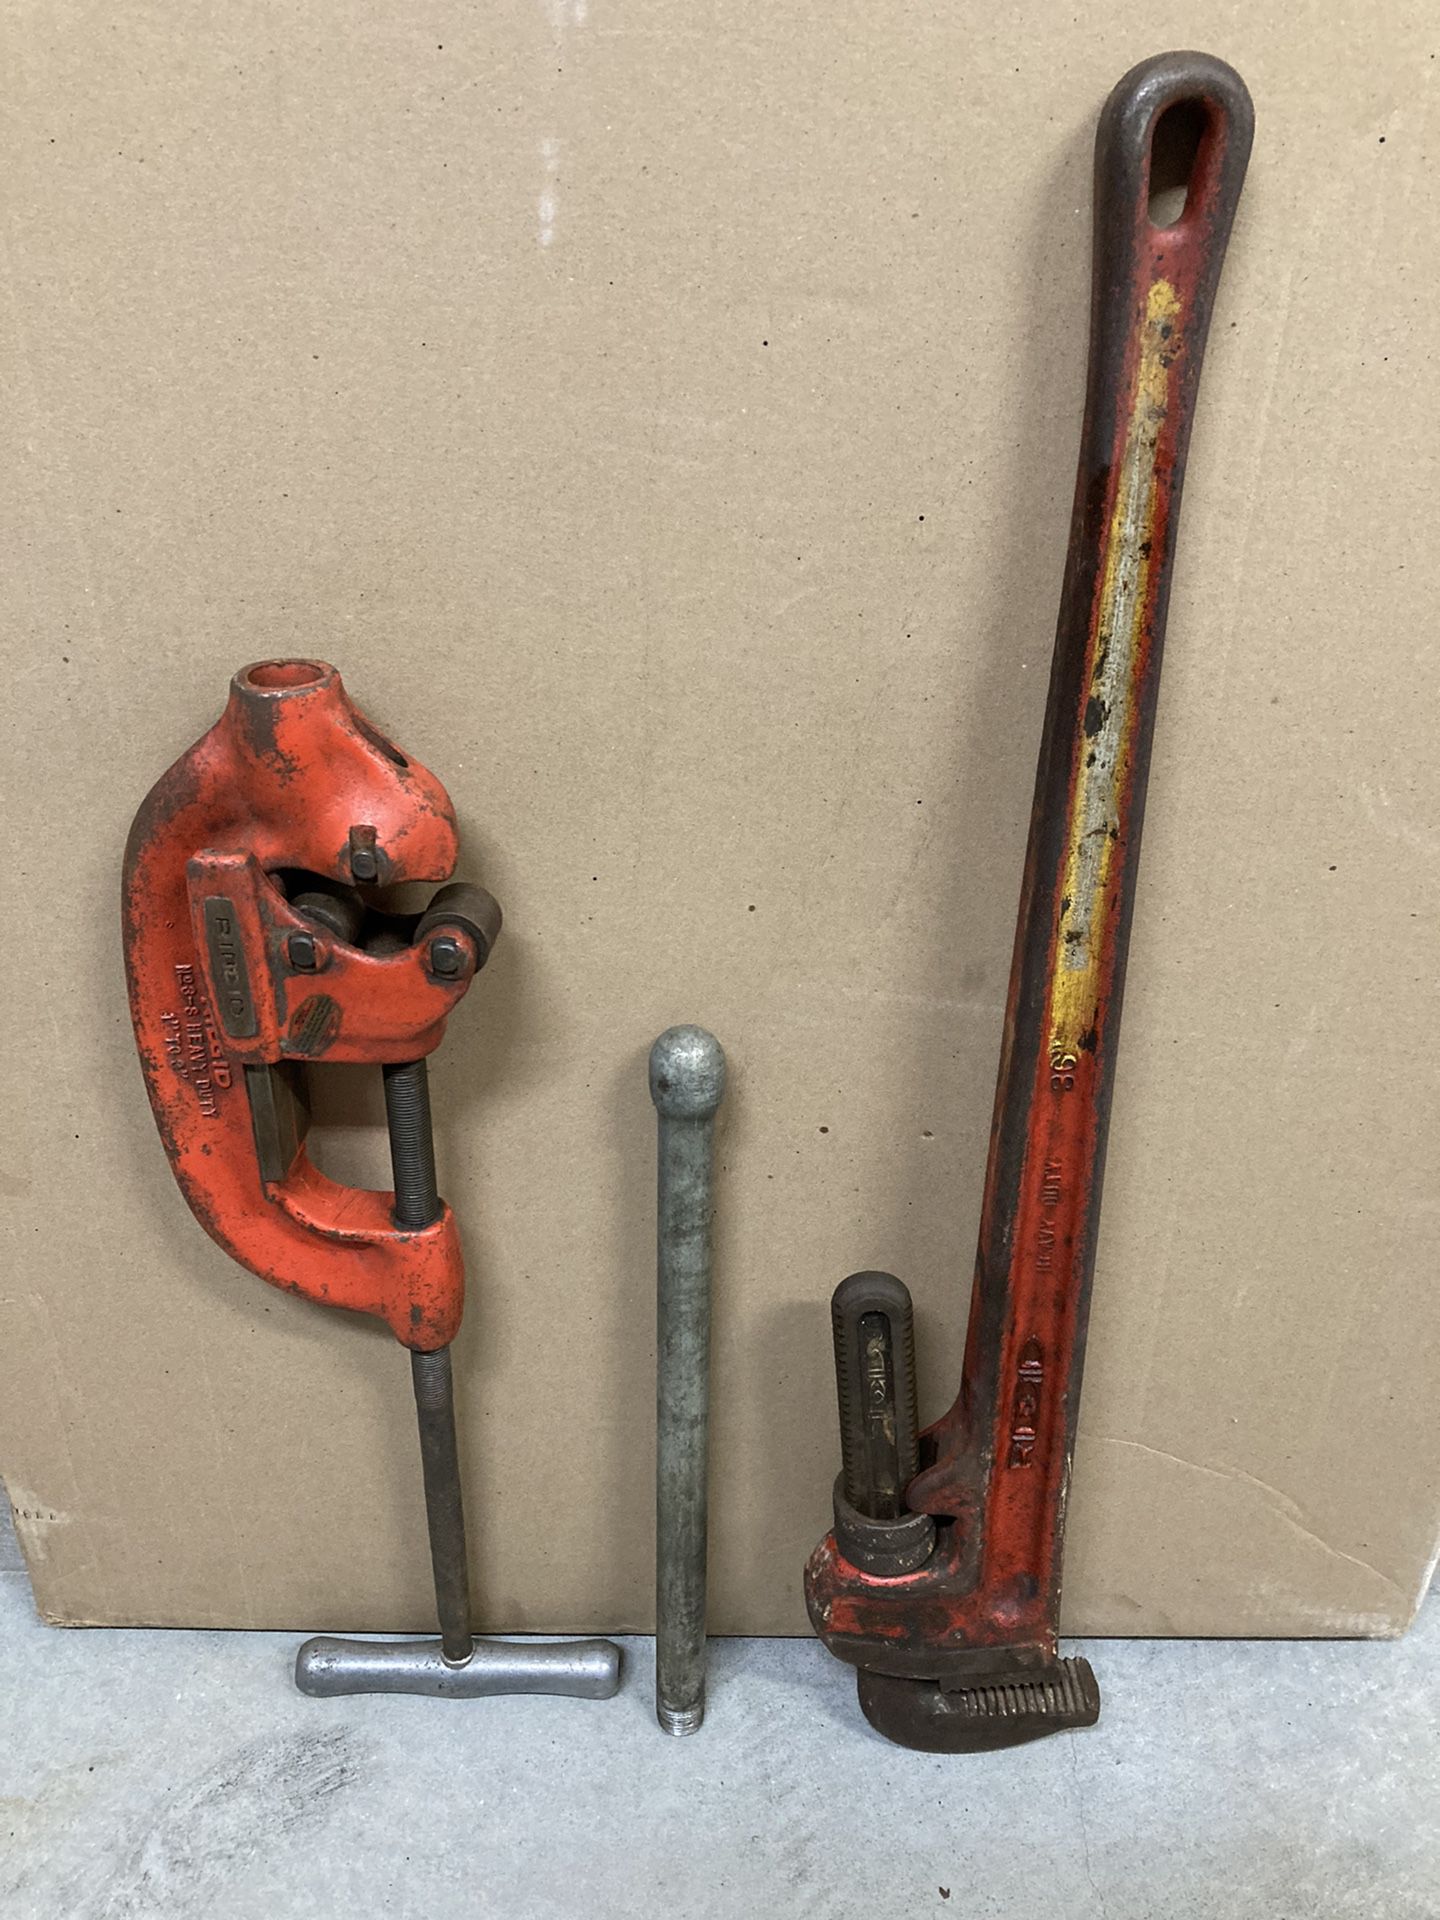 Pipe cutter and pipe wrench